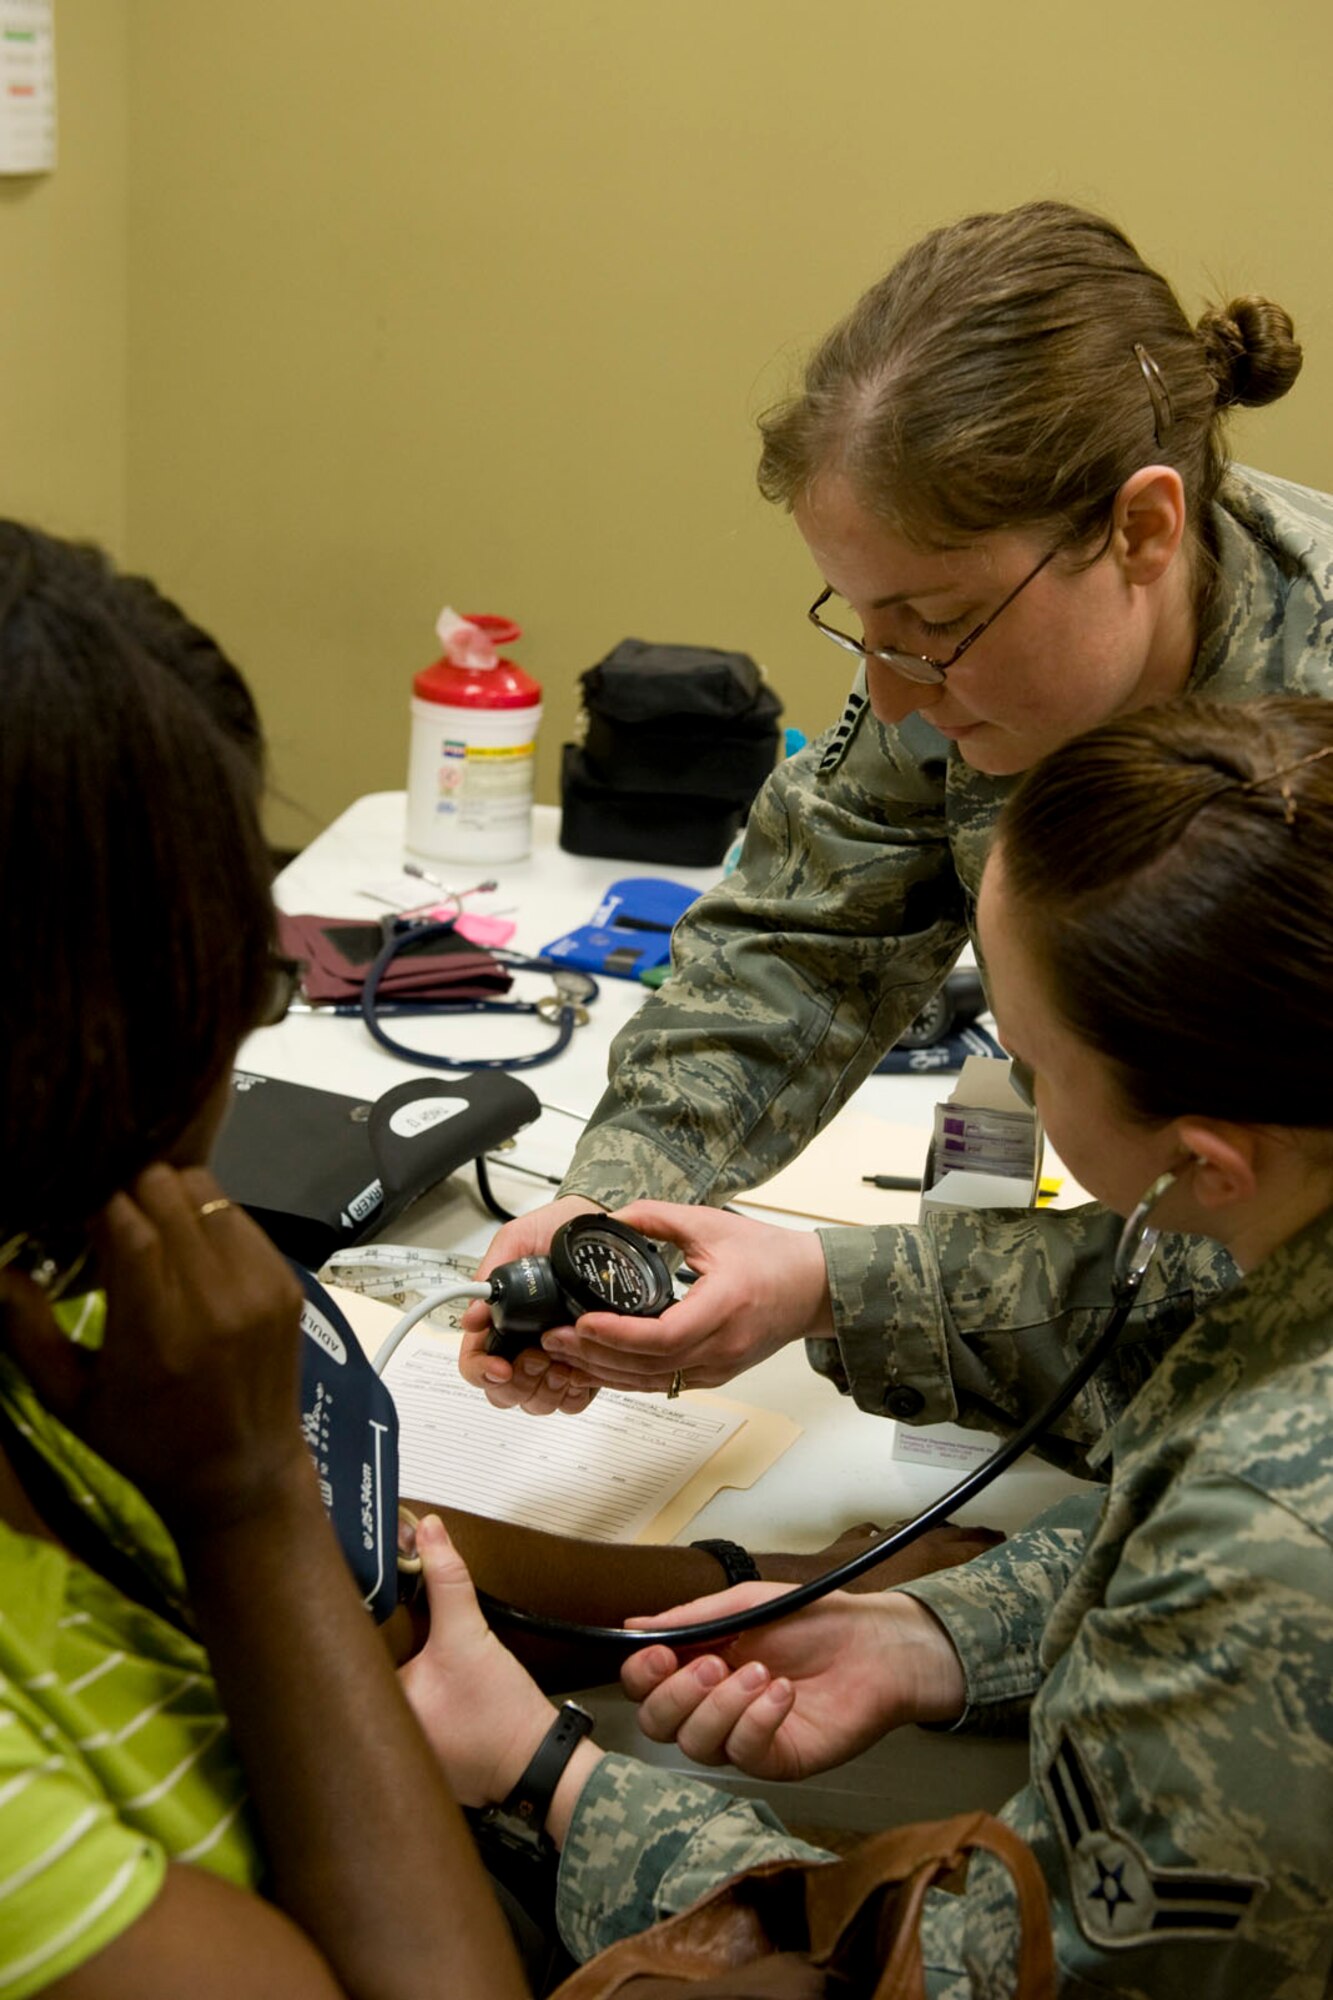 HAYNEVILLE, Ala. - Master Sgt. Jessica Alvarez, a medical service technician, from the 176th Medical Group, Alaska Air National Guard and Airman 1st Class Megan McCarthy, a medical service technician, from the 673d Medical Group, from Joint Base Elmendorf-Richardson, Alaska check a patient?s blood pressure, May 5, 2011. Alvarez and McCarthy are in Alabama along with about sixty other medical professional from numerous military components and services for an Innovative Readiness Training (IRT) mission. The IRT program allows for real world training opportunities for military personnel while providing needed services to under-served communities in the United States. Alaska Air National Guard photo by Master Sgt. Shannon Oleson.